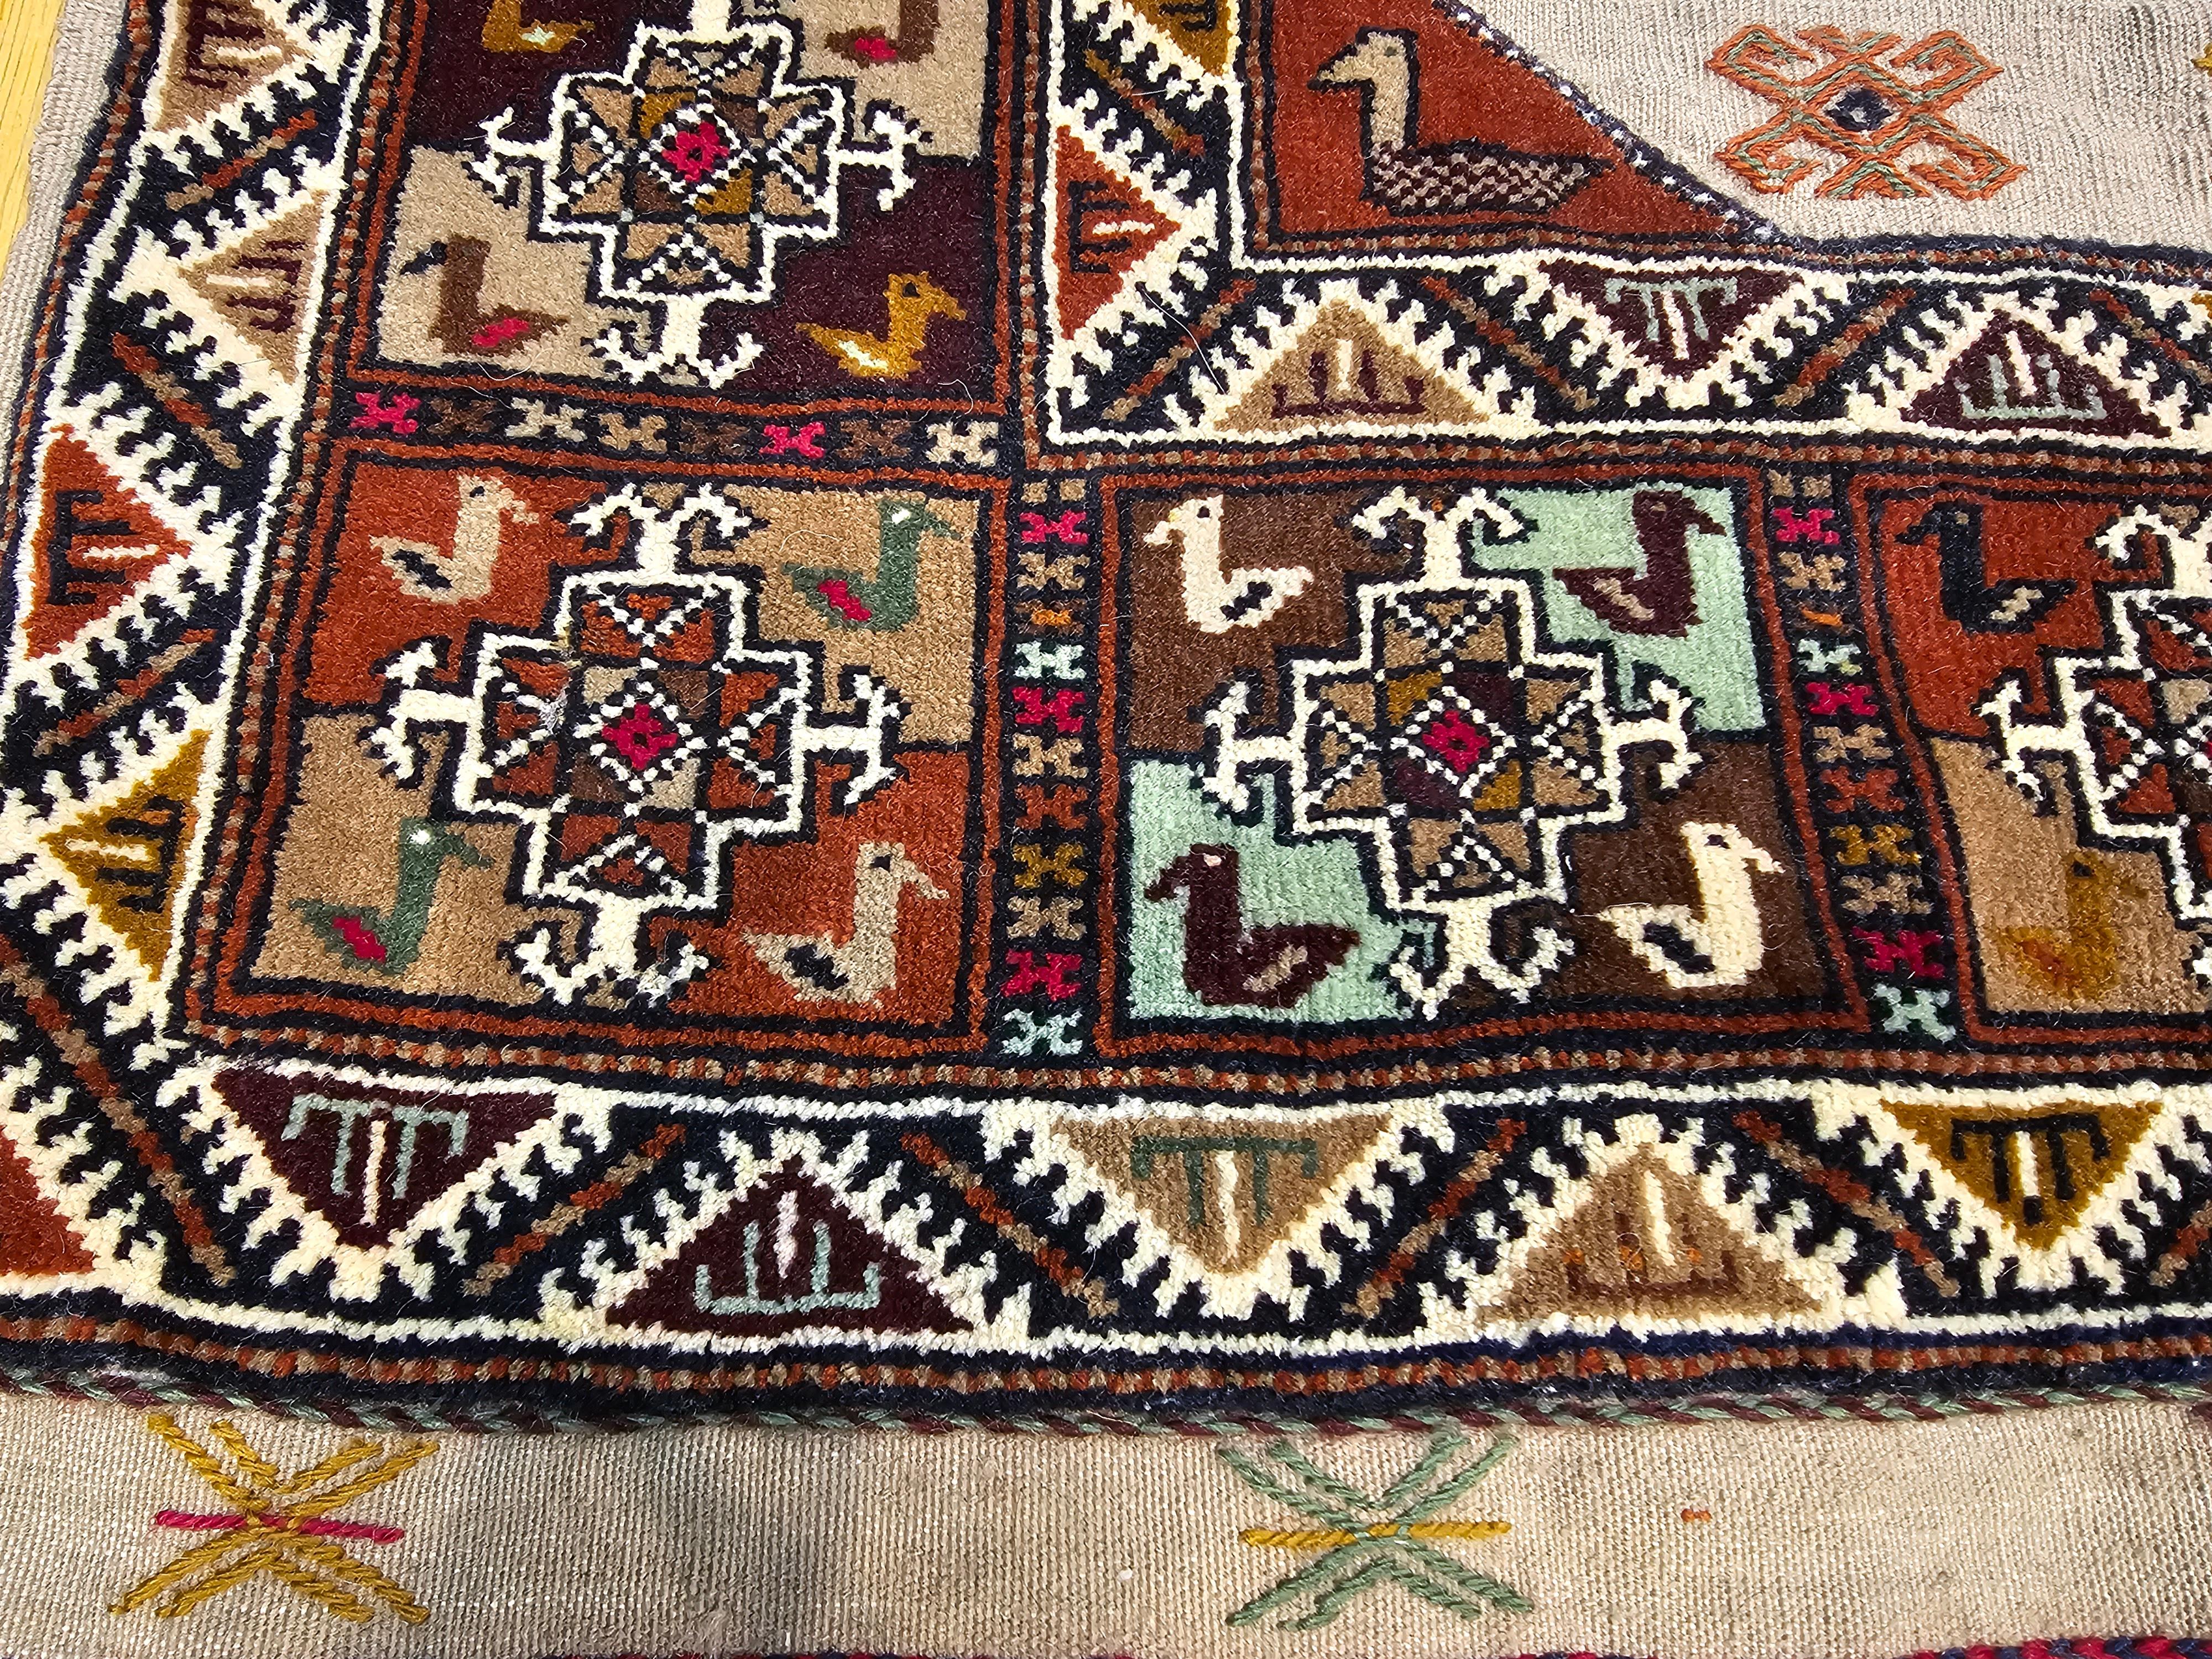 Vintage Hand-Woven Persian Qashqai Tribal Tapestry in Tree of Life Pattern For Sale 4